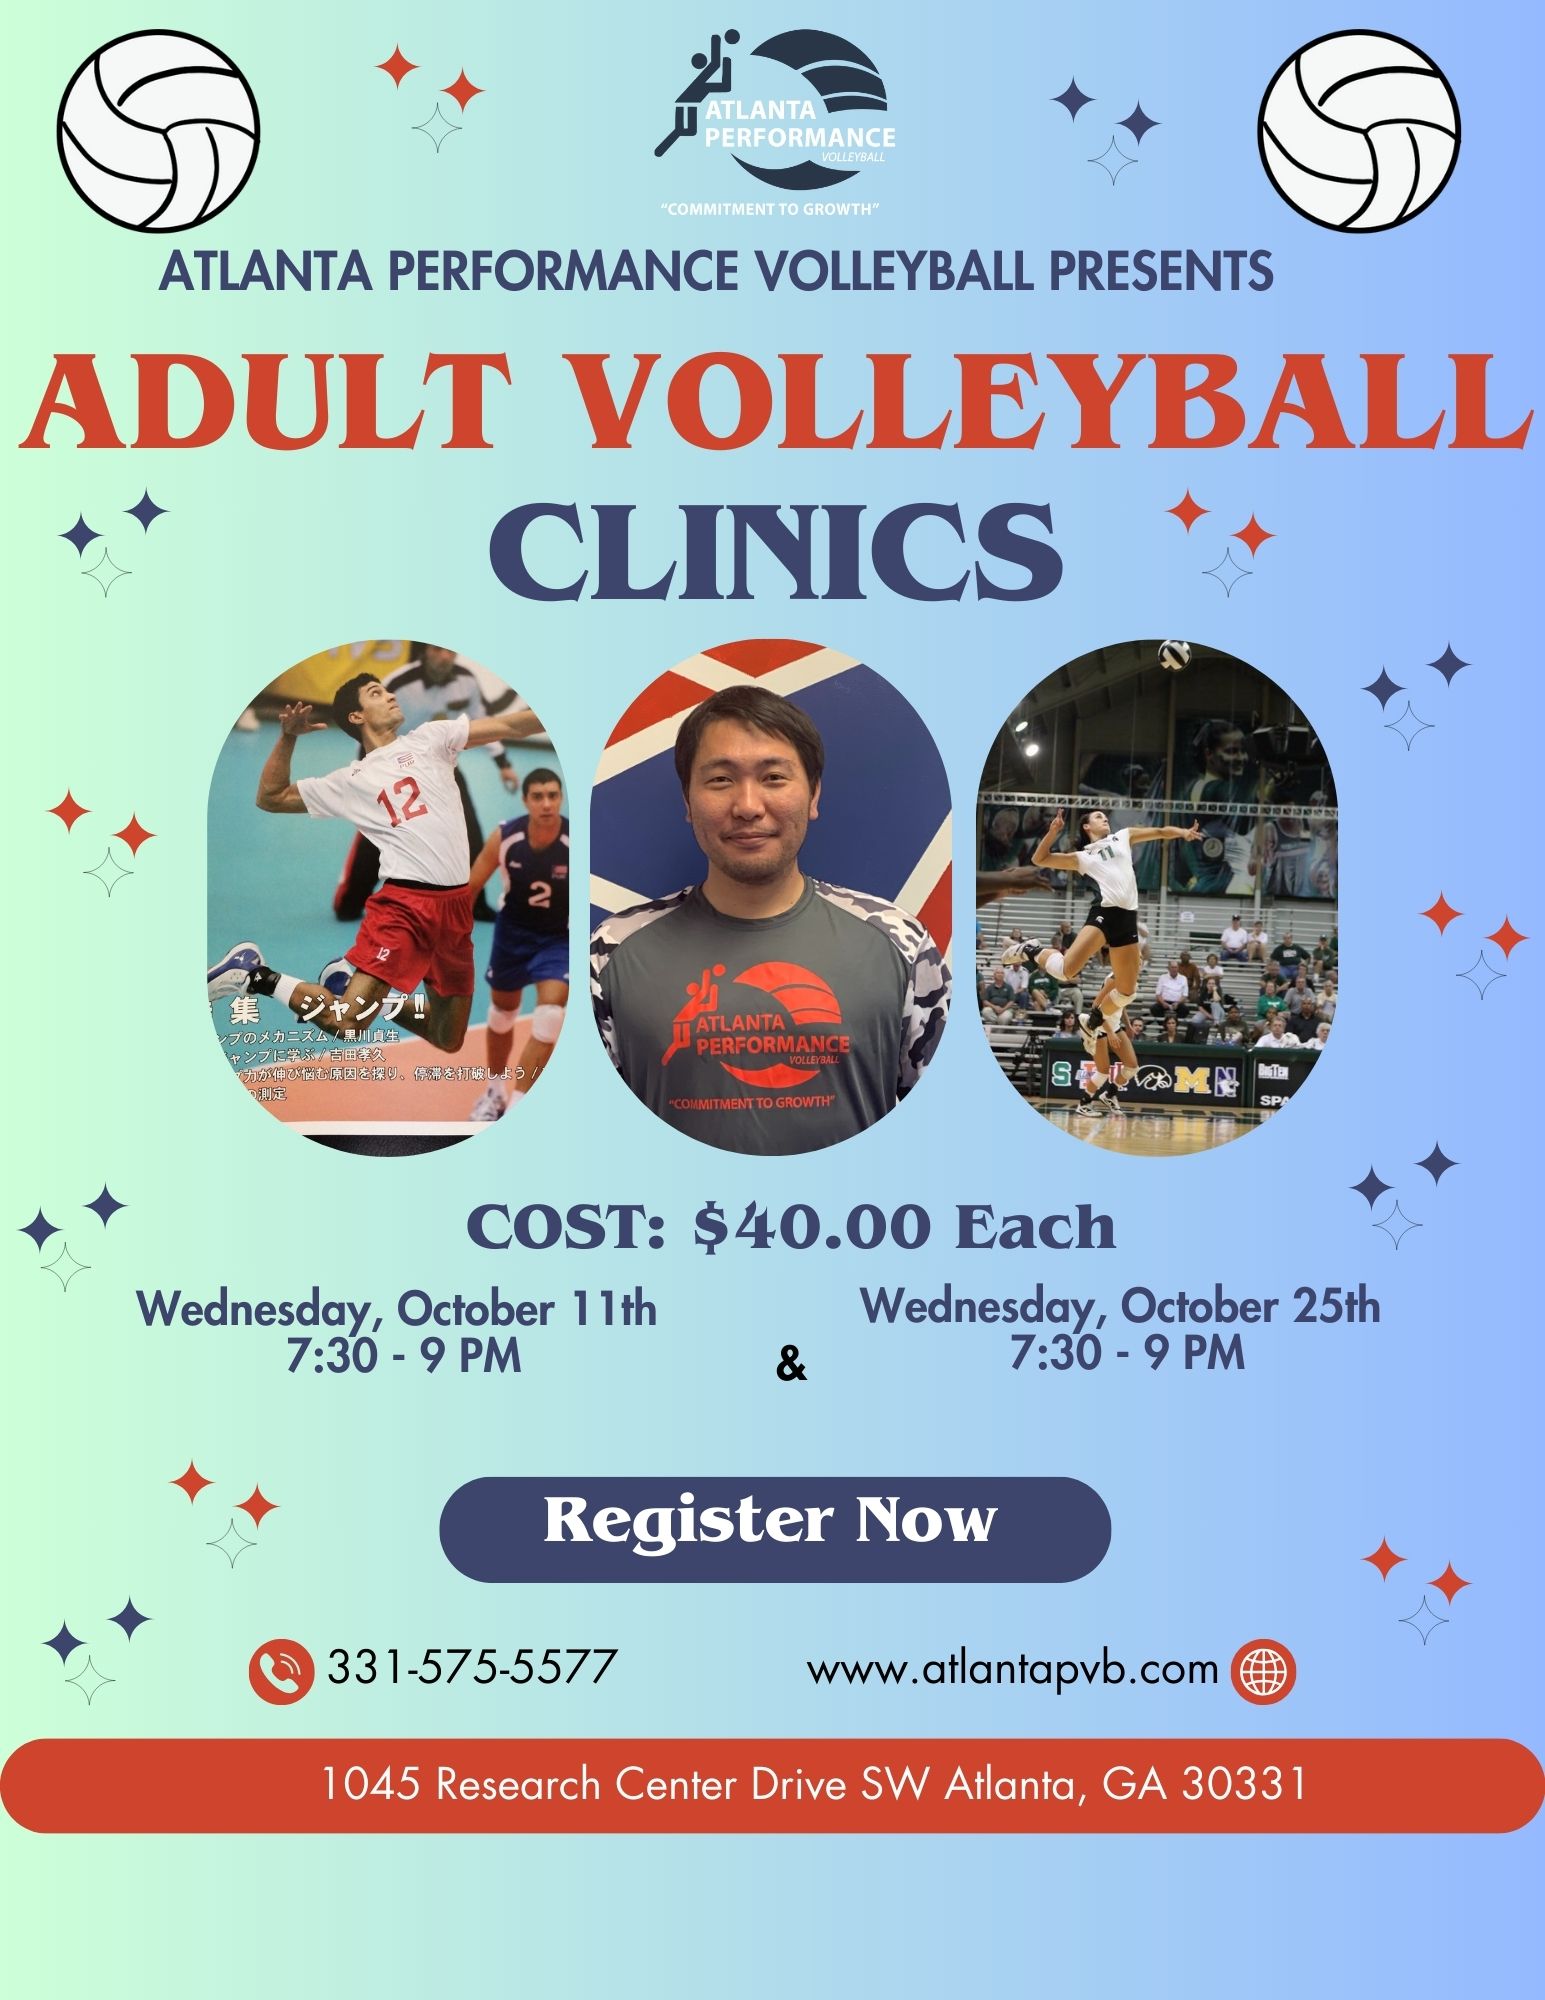 Adult Volleyball Clinics